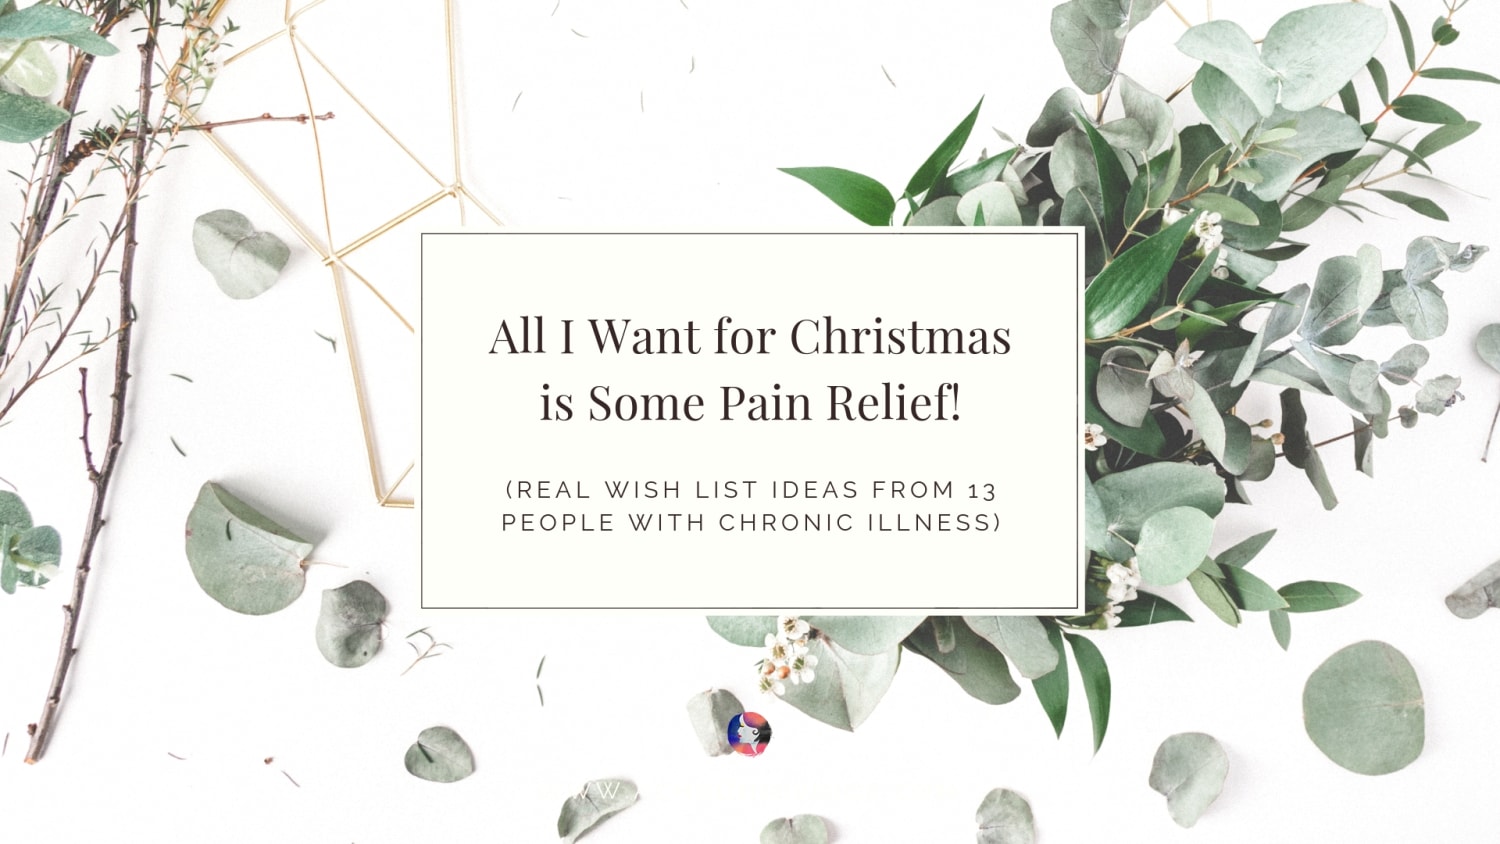 All I Want for Christmas is Some Pain Relief! (Real Wish List Ideas from 13 People with Chronic Illness)